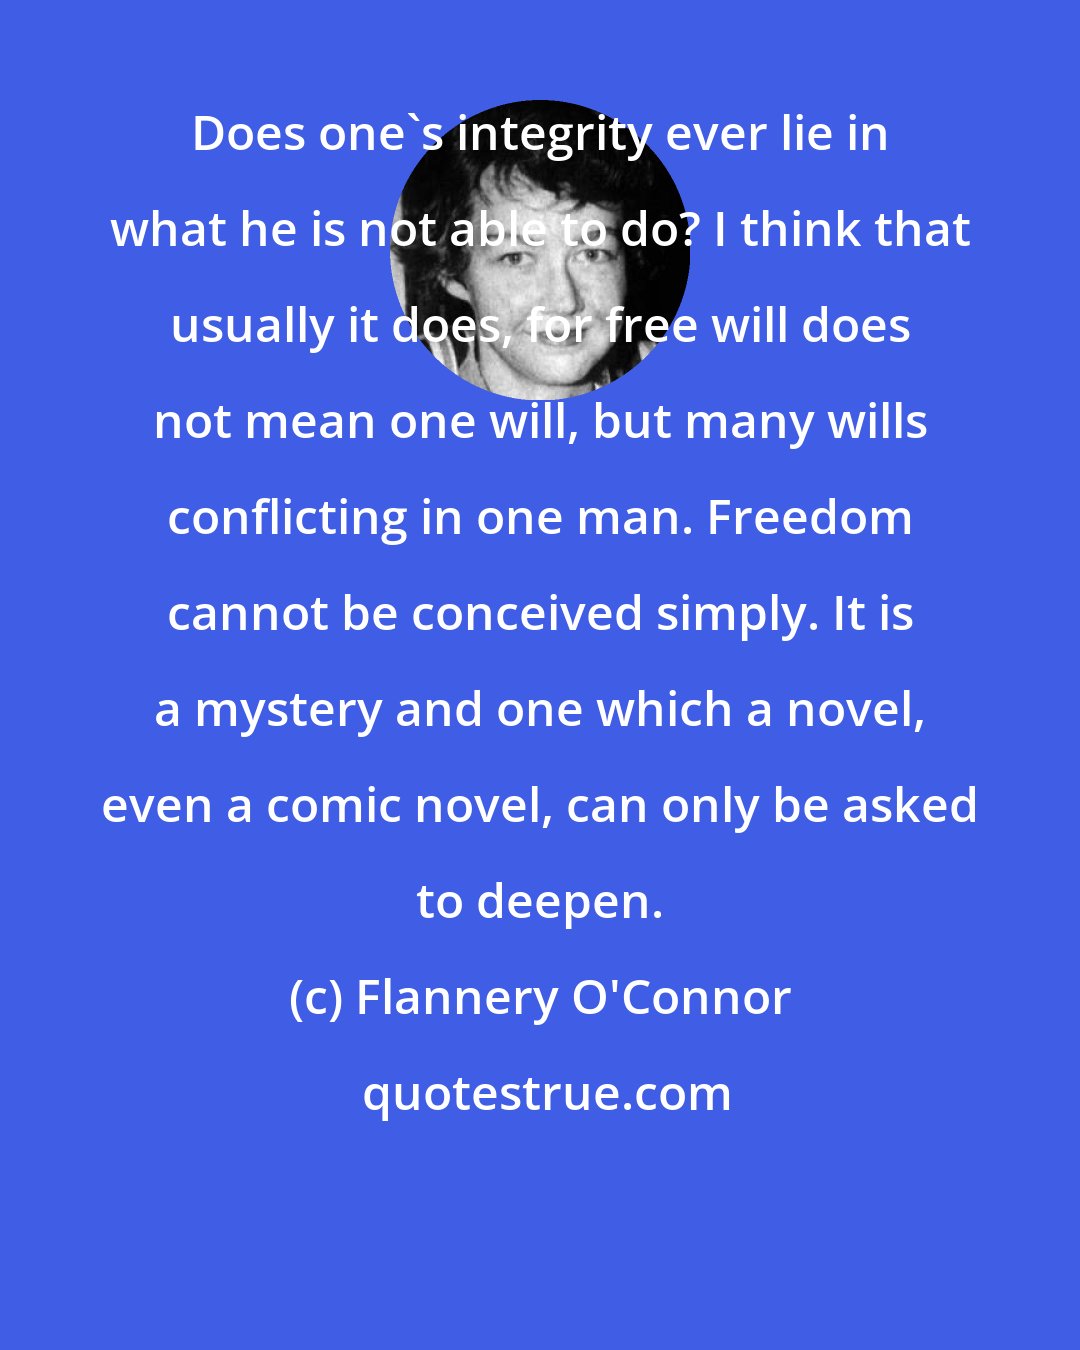 Flannery O'Connor: Does one's integrity ever lie in what he is not able to do? I think that usually it does, for free will does not mean one will, but many wills conflicting in one man. Freedom cannot be conceived simply. It is a mystery and one which a novel, even a comic novel, can only be asked to deepen.